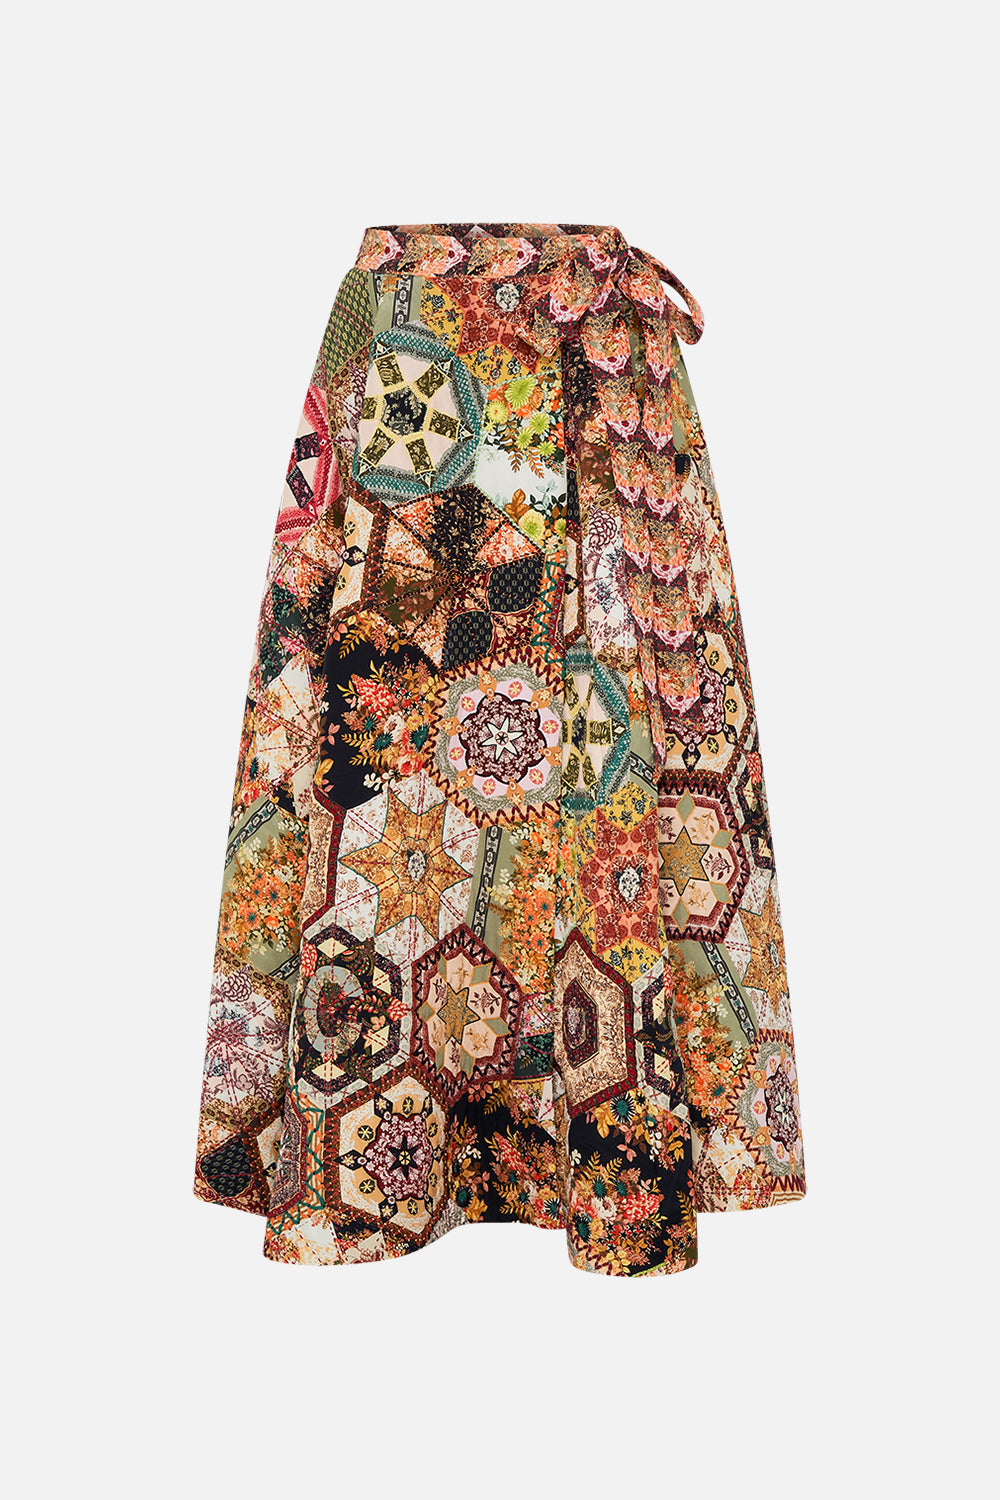 REVERSIBLE EMBROIDERED QUILTED WRAP SKIRT STITCHED IN TIME